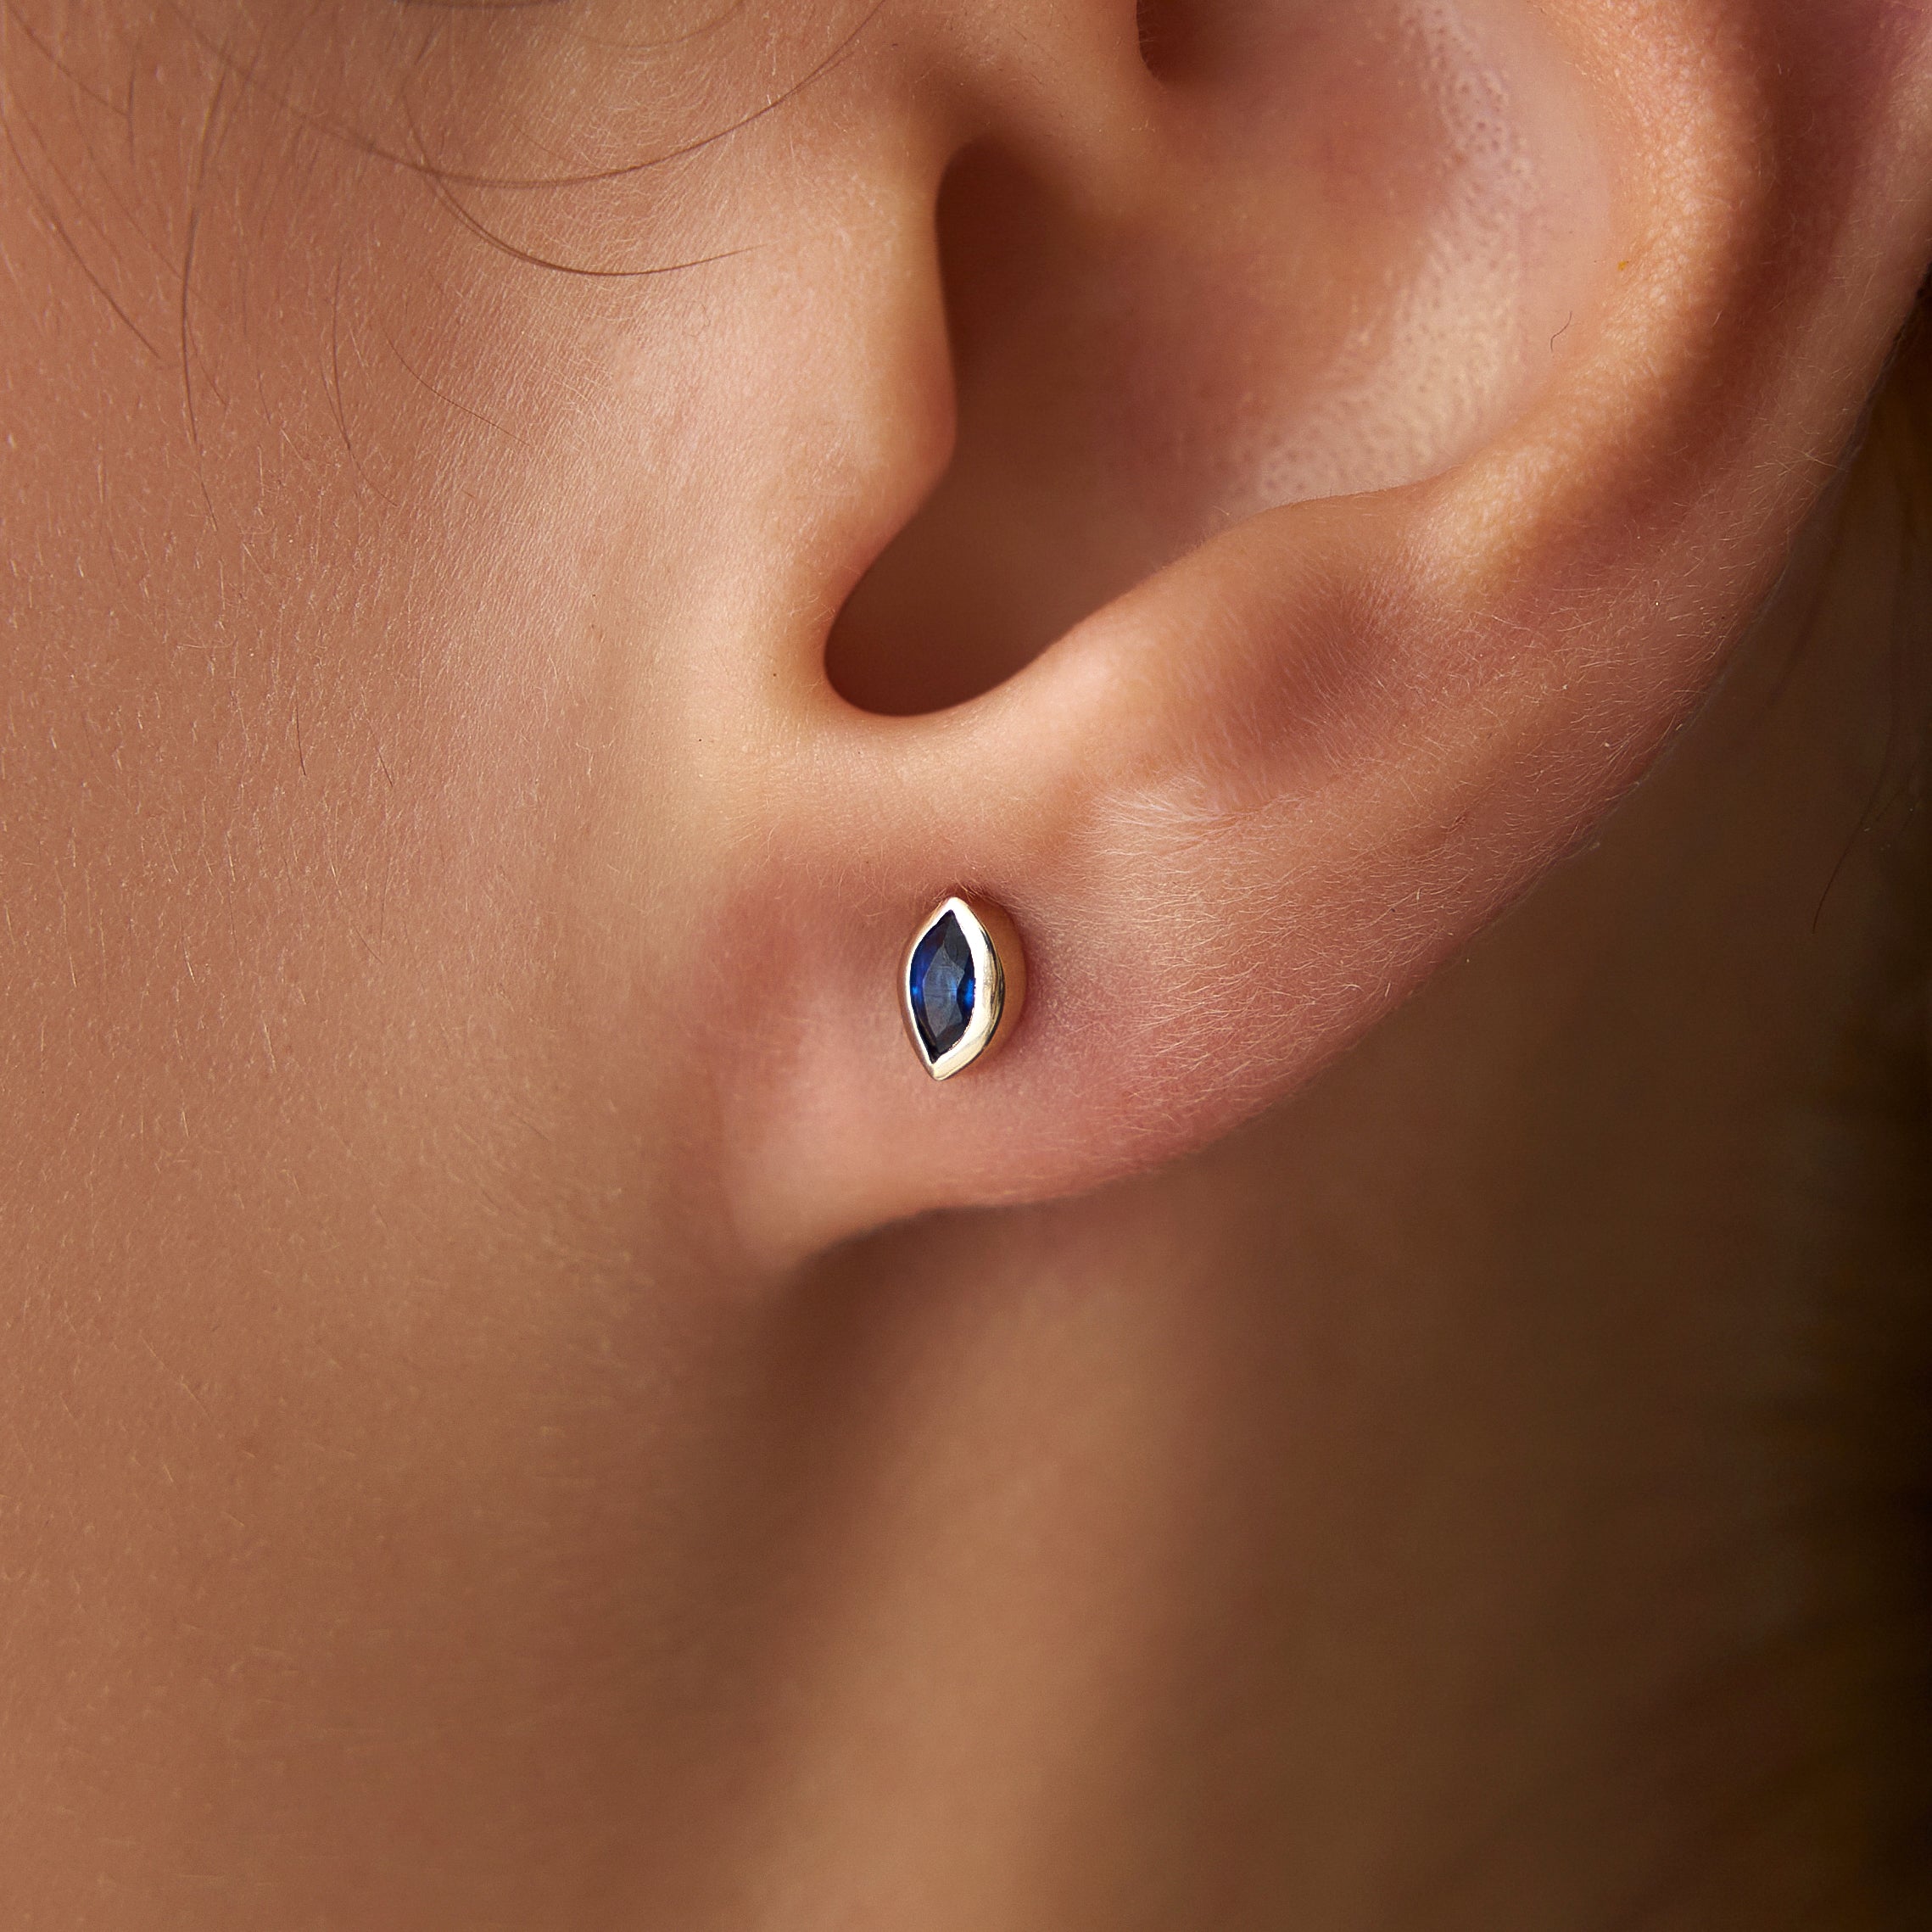 Marquise Blue Sapphire Stud Earrings Available in 14K and 18K Gold